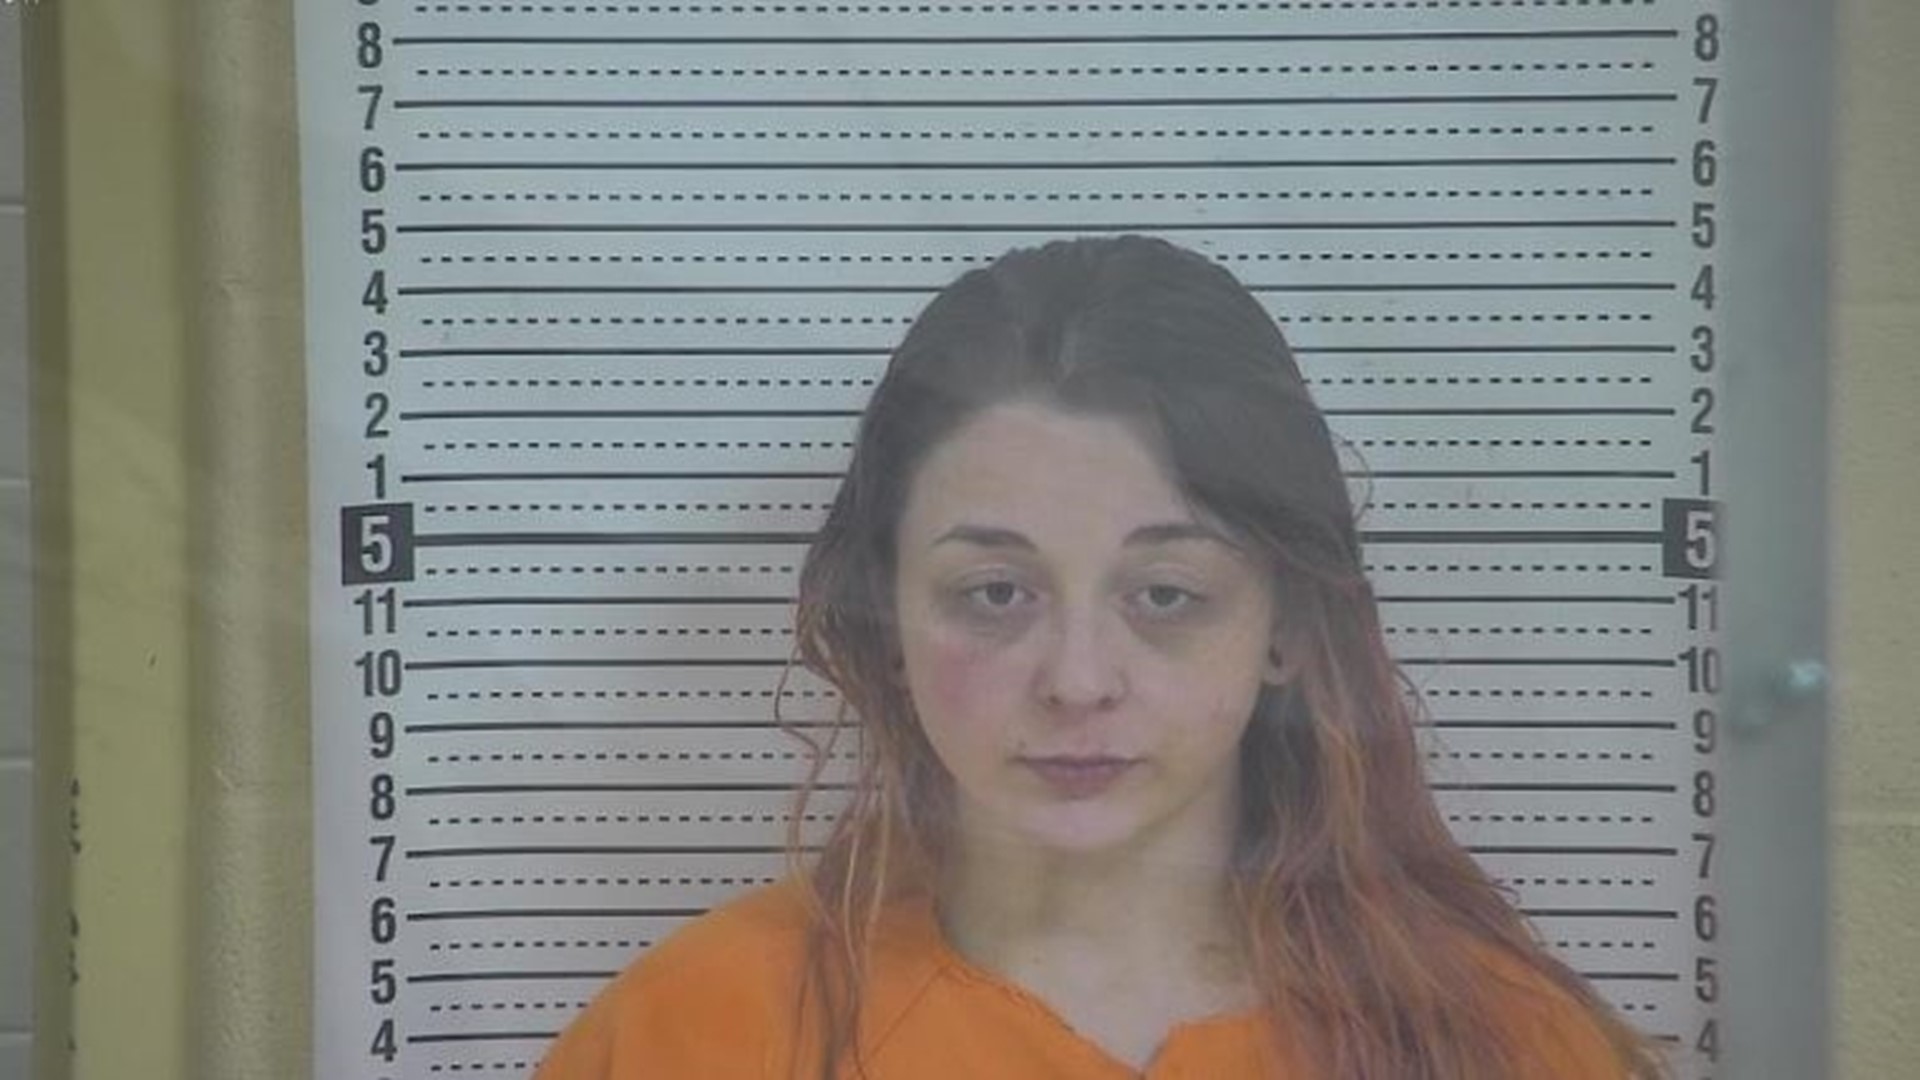 Haley Fisher, 24, told police her three children were home when she smoked meth and left her bedroom door open. Thirty minutes later, her 6-month-old was found dead.